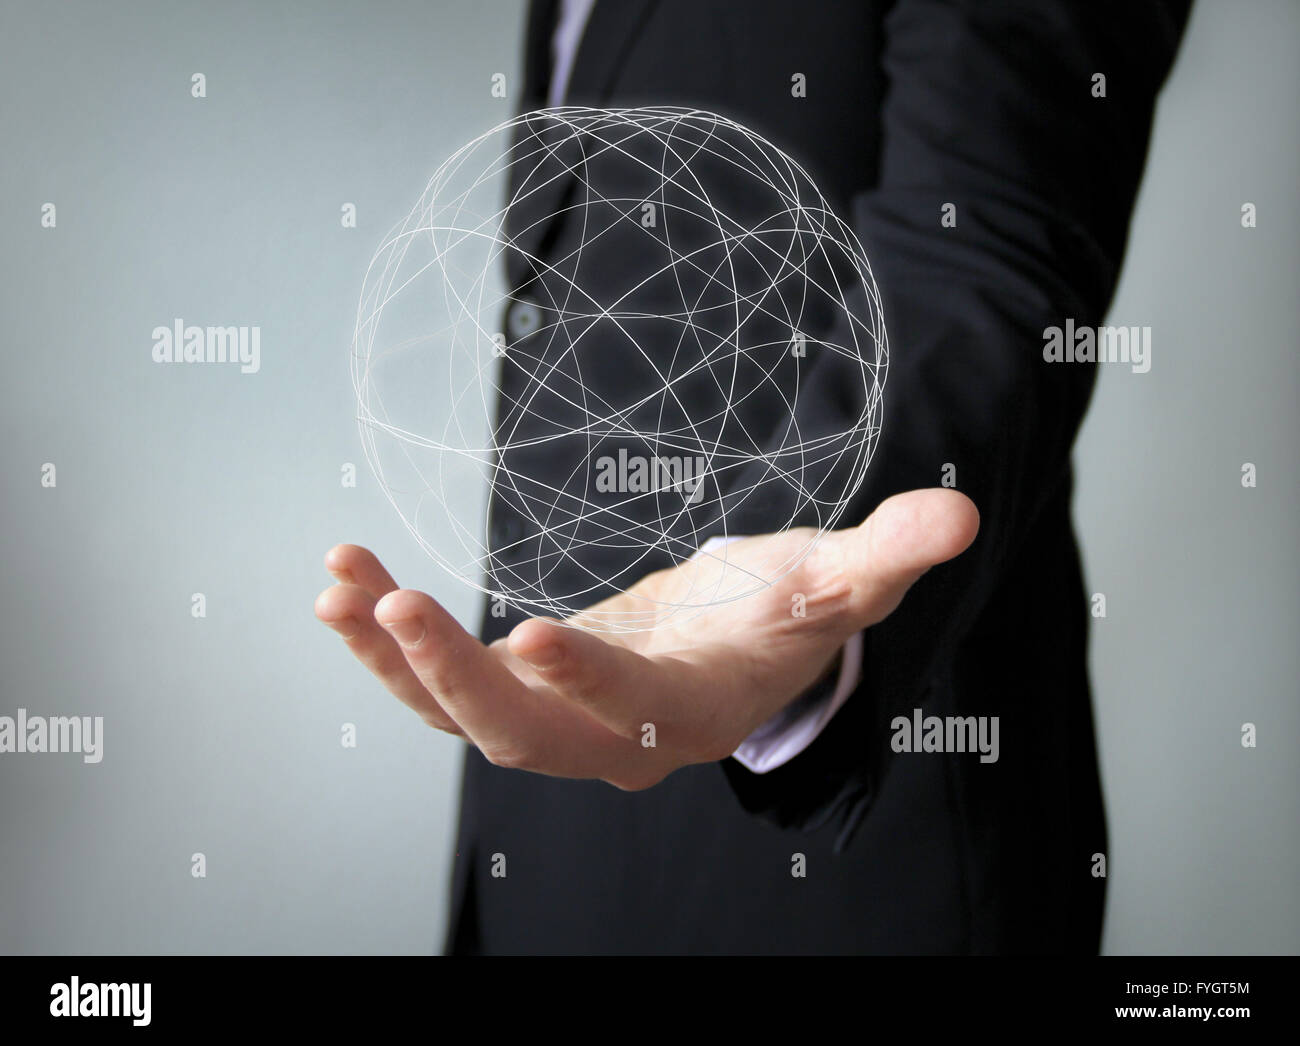 worldwide concept: spherical structure over businessman han Stock Photo